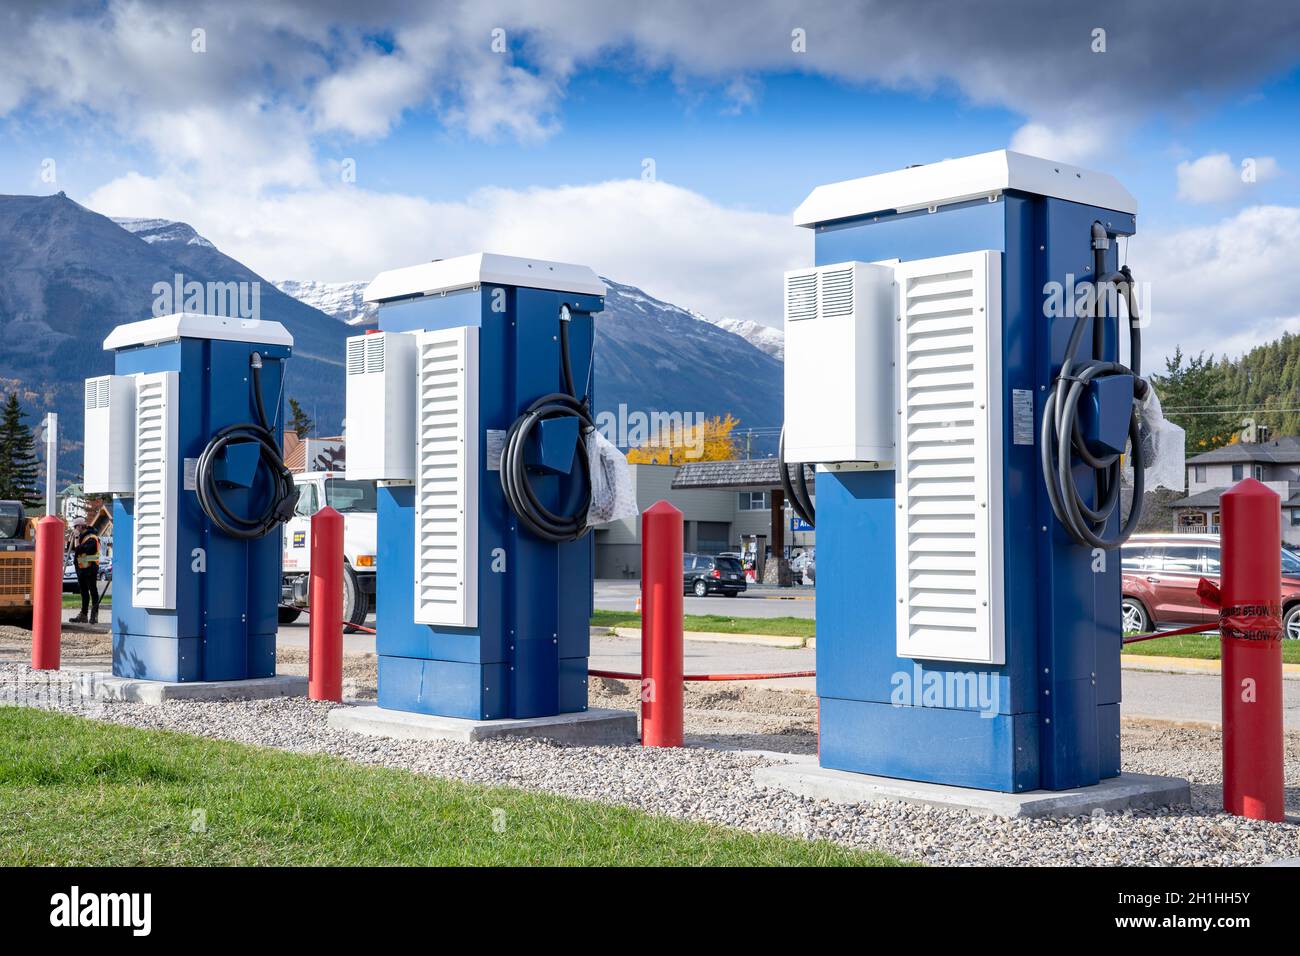 Jasper Alberta Canada, October 05 2021: Electric vehicle car charging station recently installed in a National Park. Stock Photo